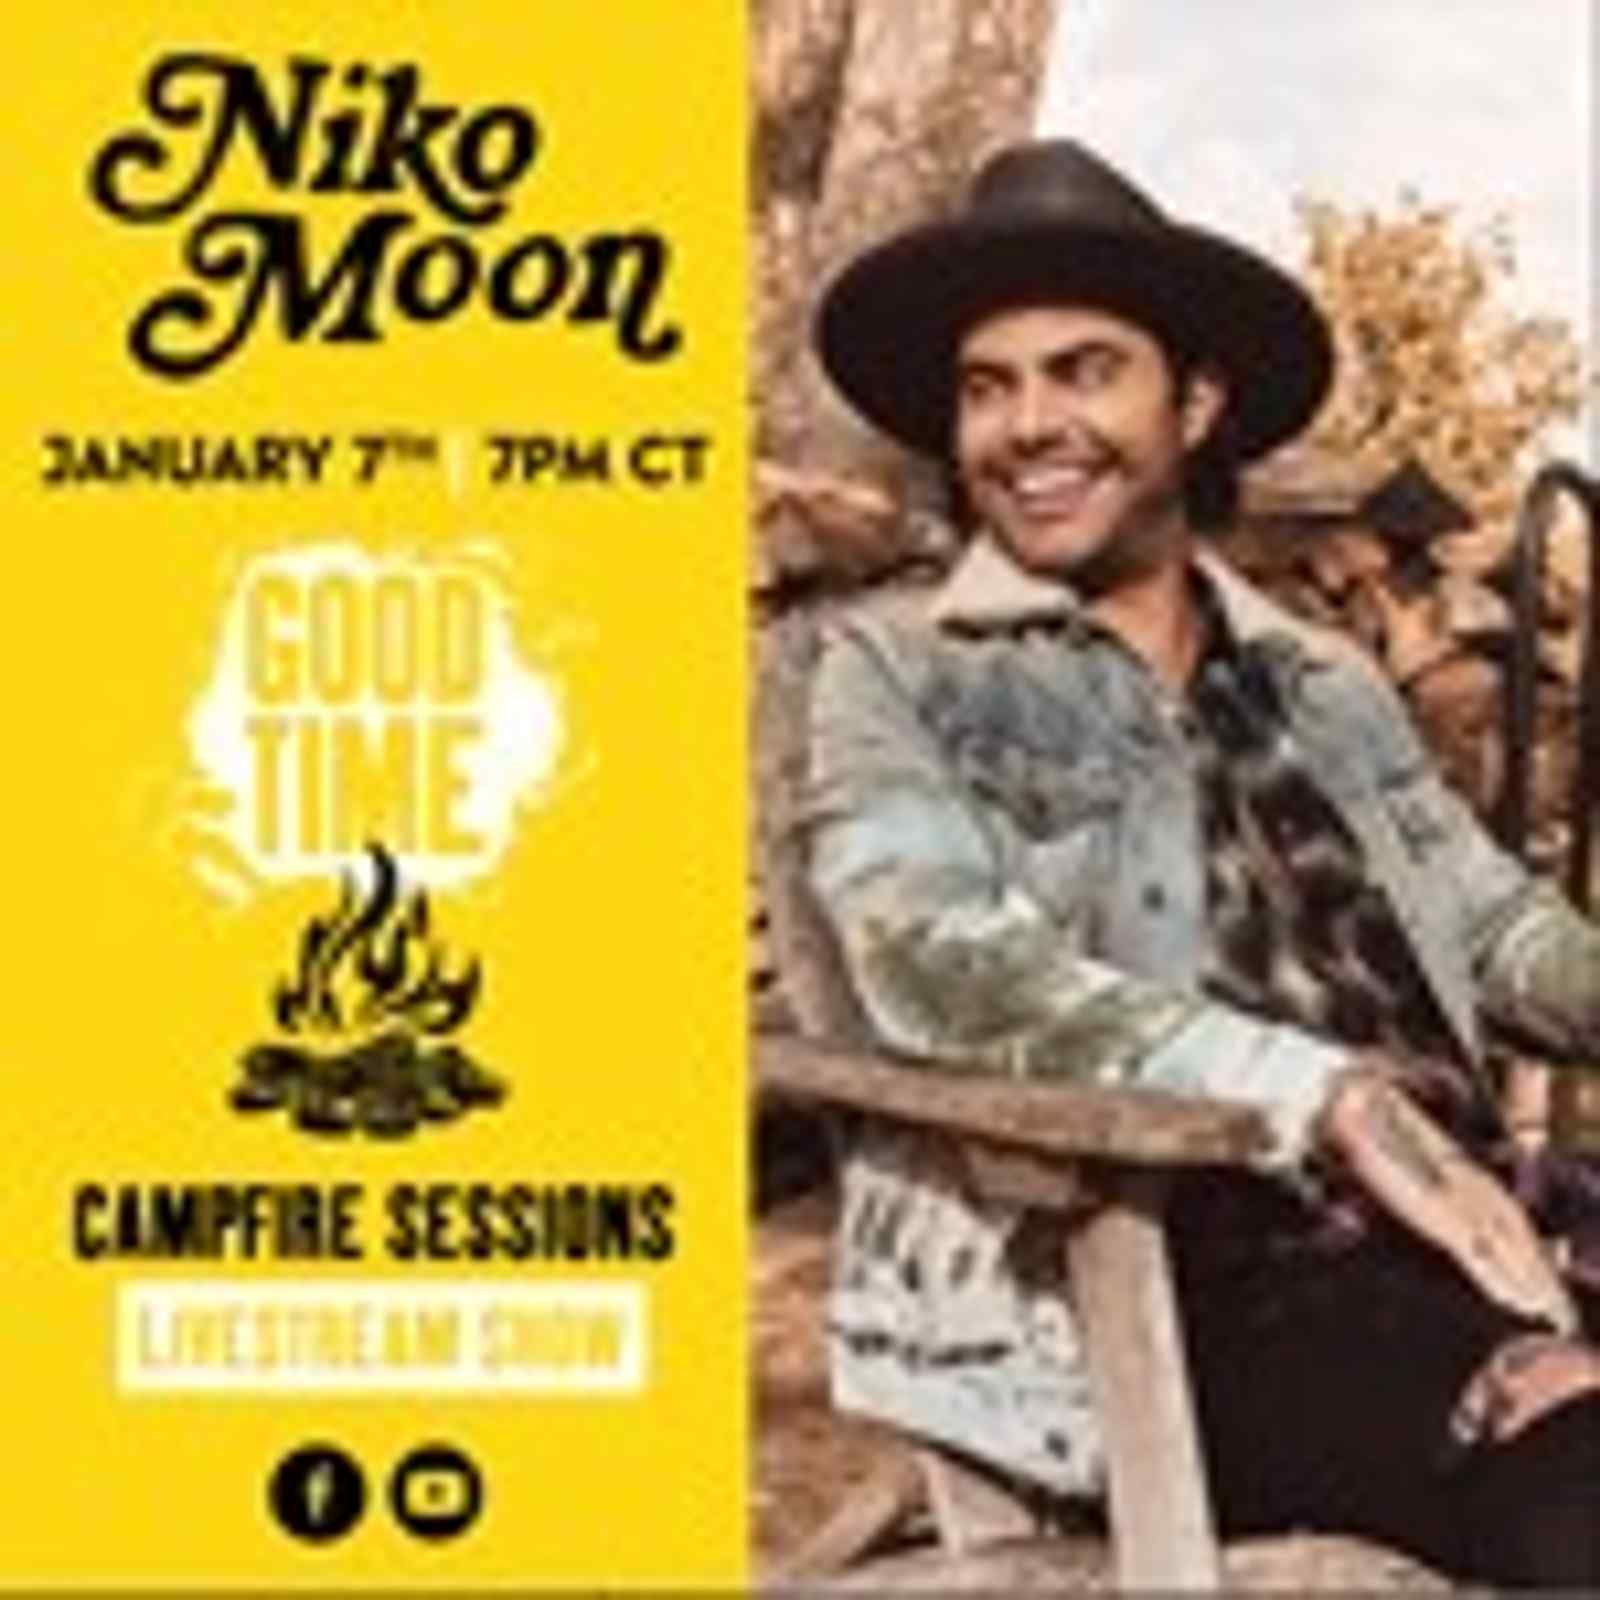 Good Time Campfire Sessions with Niko Moon